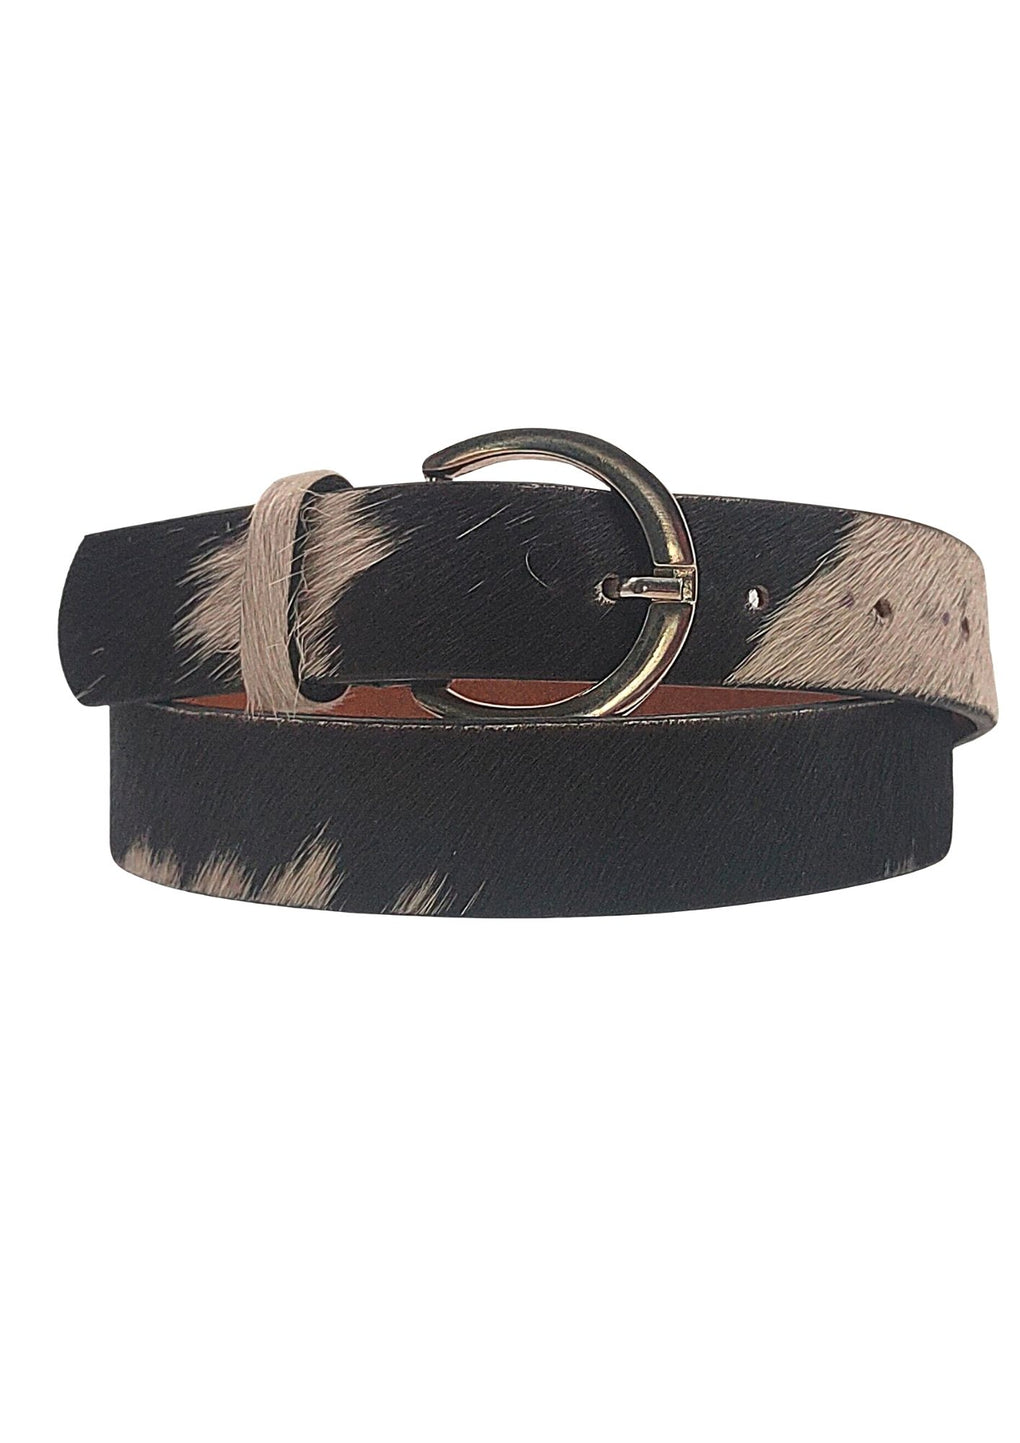 Cow Skin Hair-On Leather Belt With Silver Buckle (LB-1019_Black)